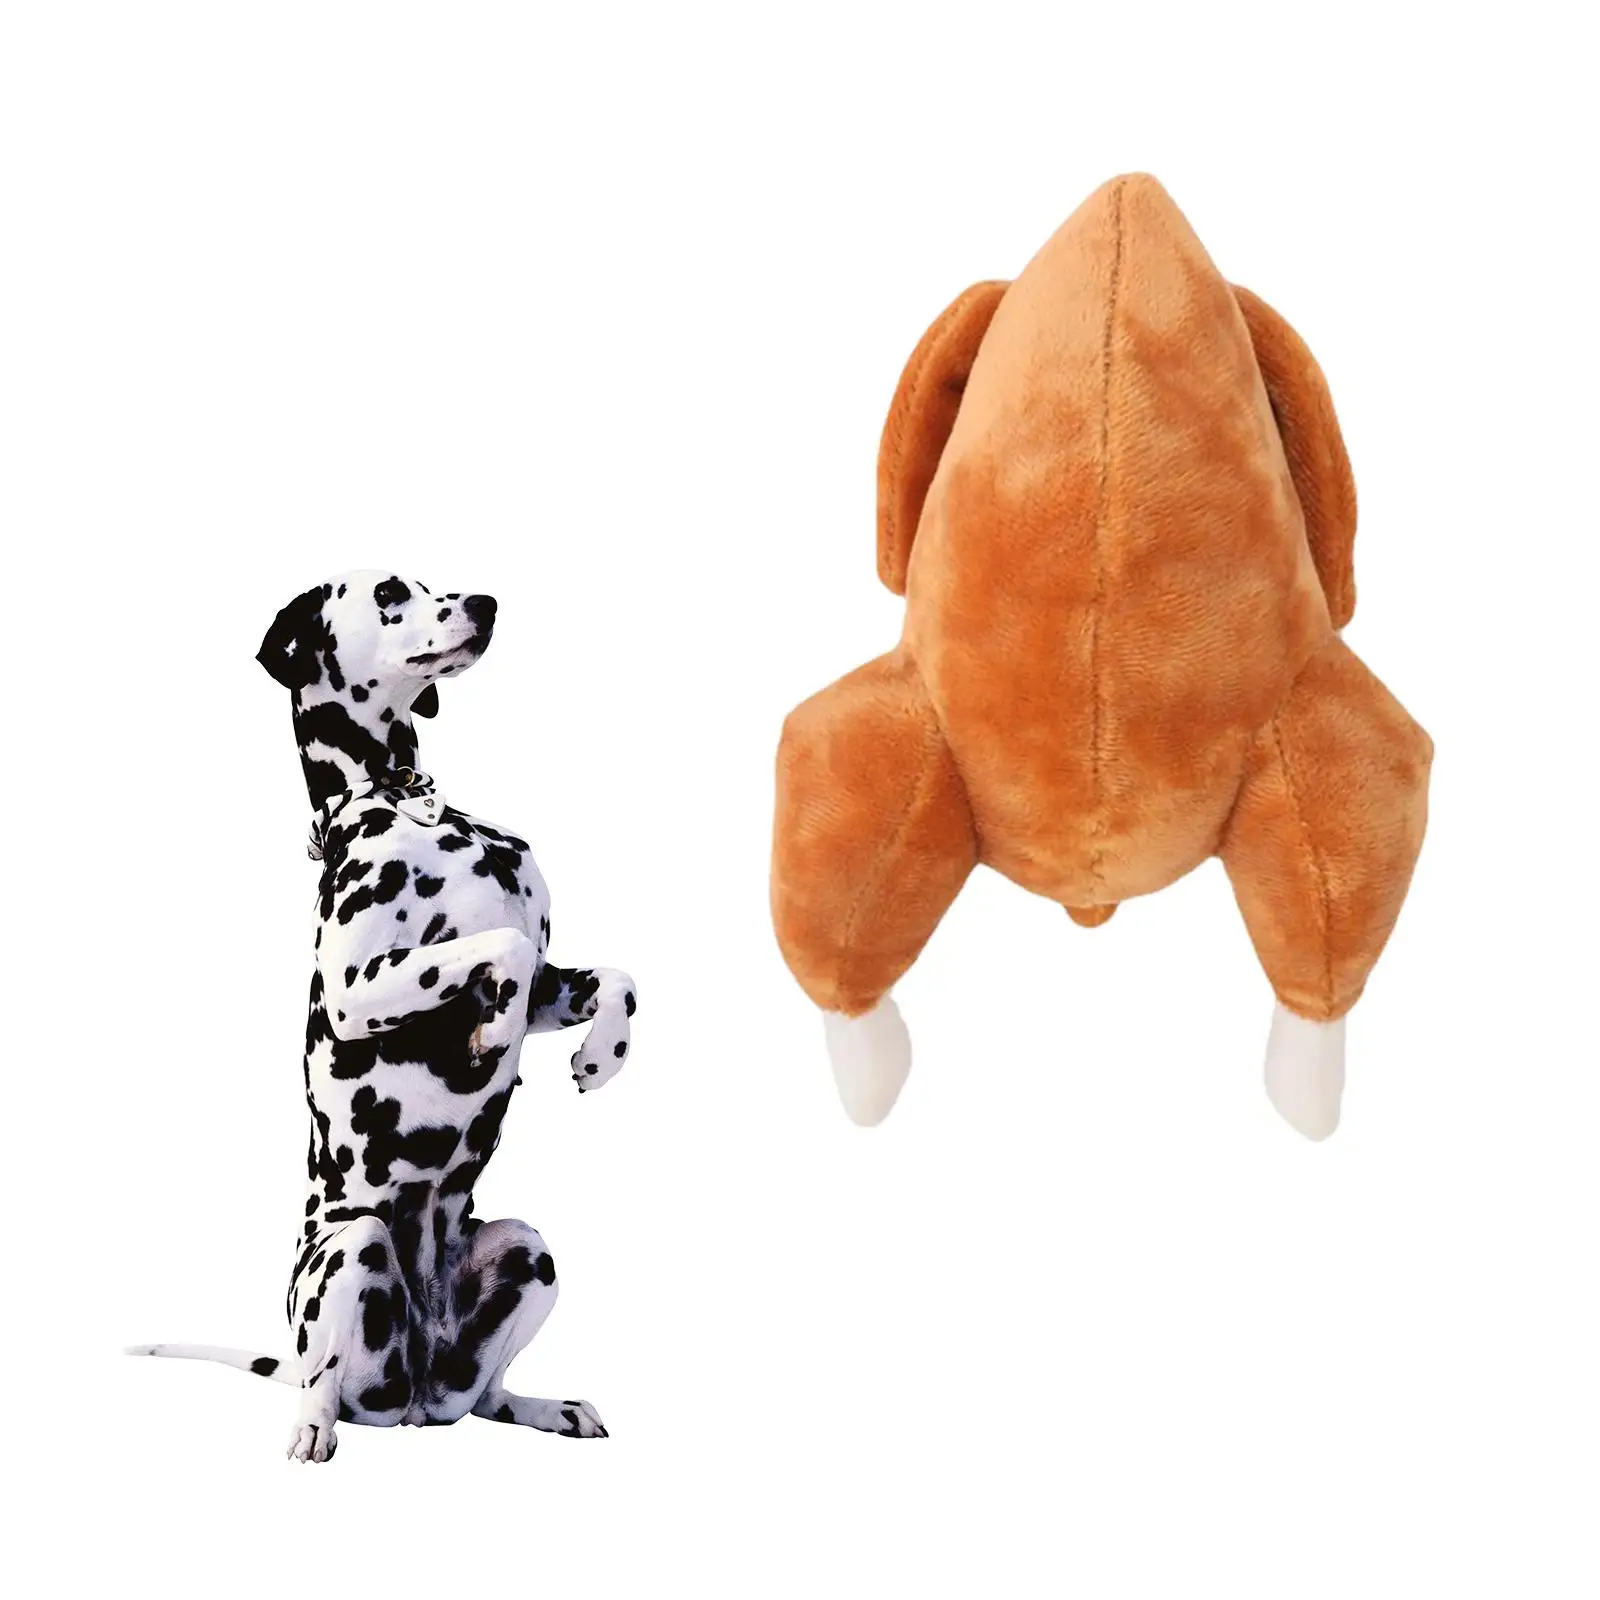 Pet Dog Squeak Toy Plush Chew Toy Stuffed Plush Toy Plush Pet Toy Cute Dog Toy Training with Squeaker for Medium Large Dogs